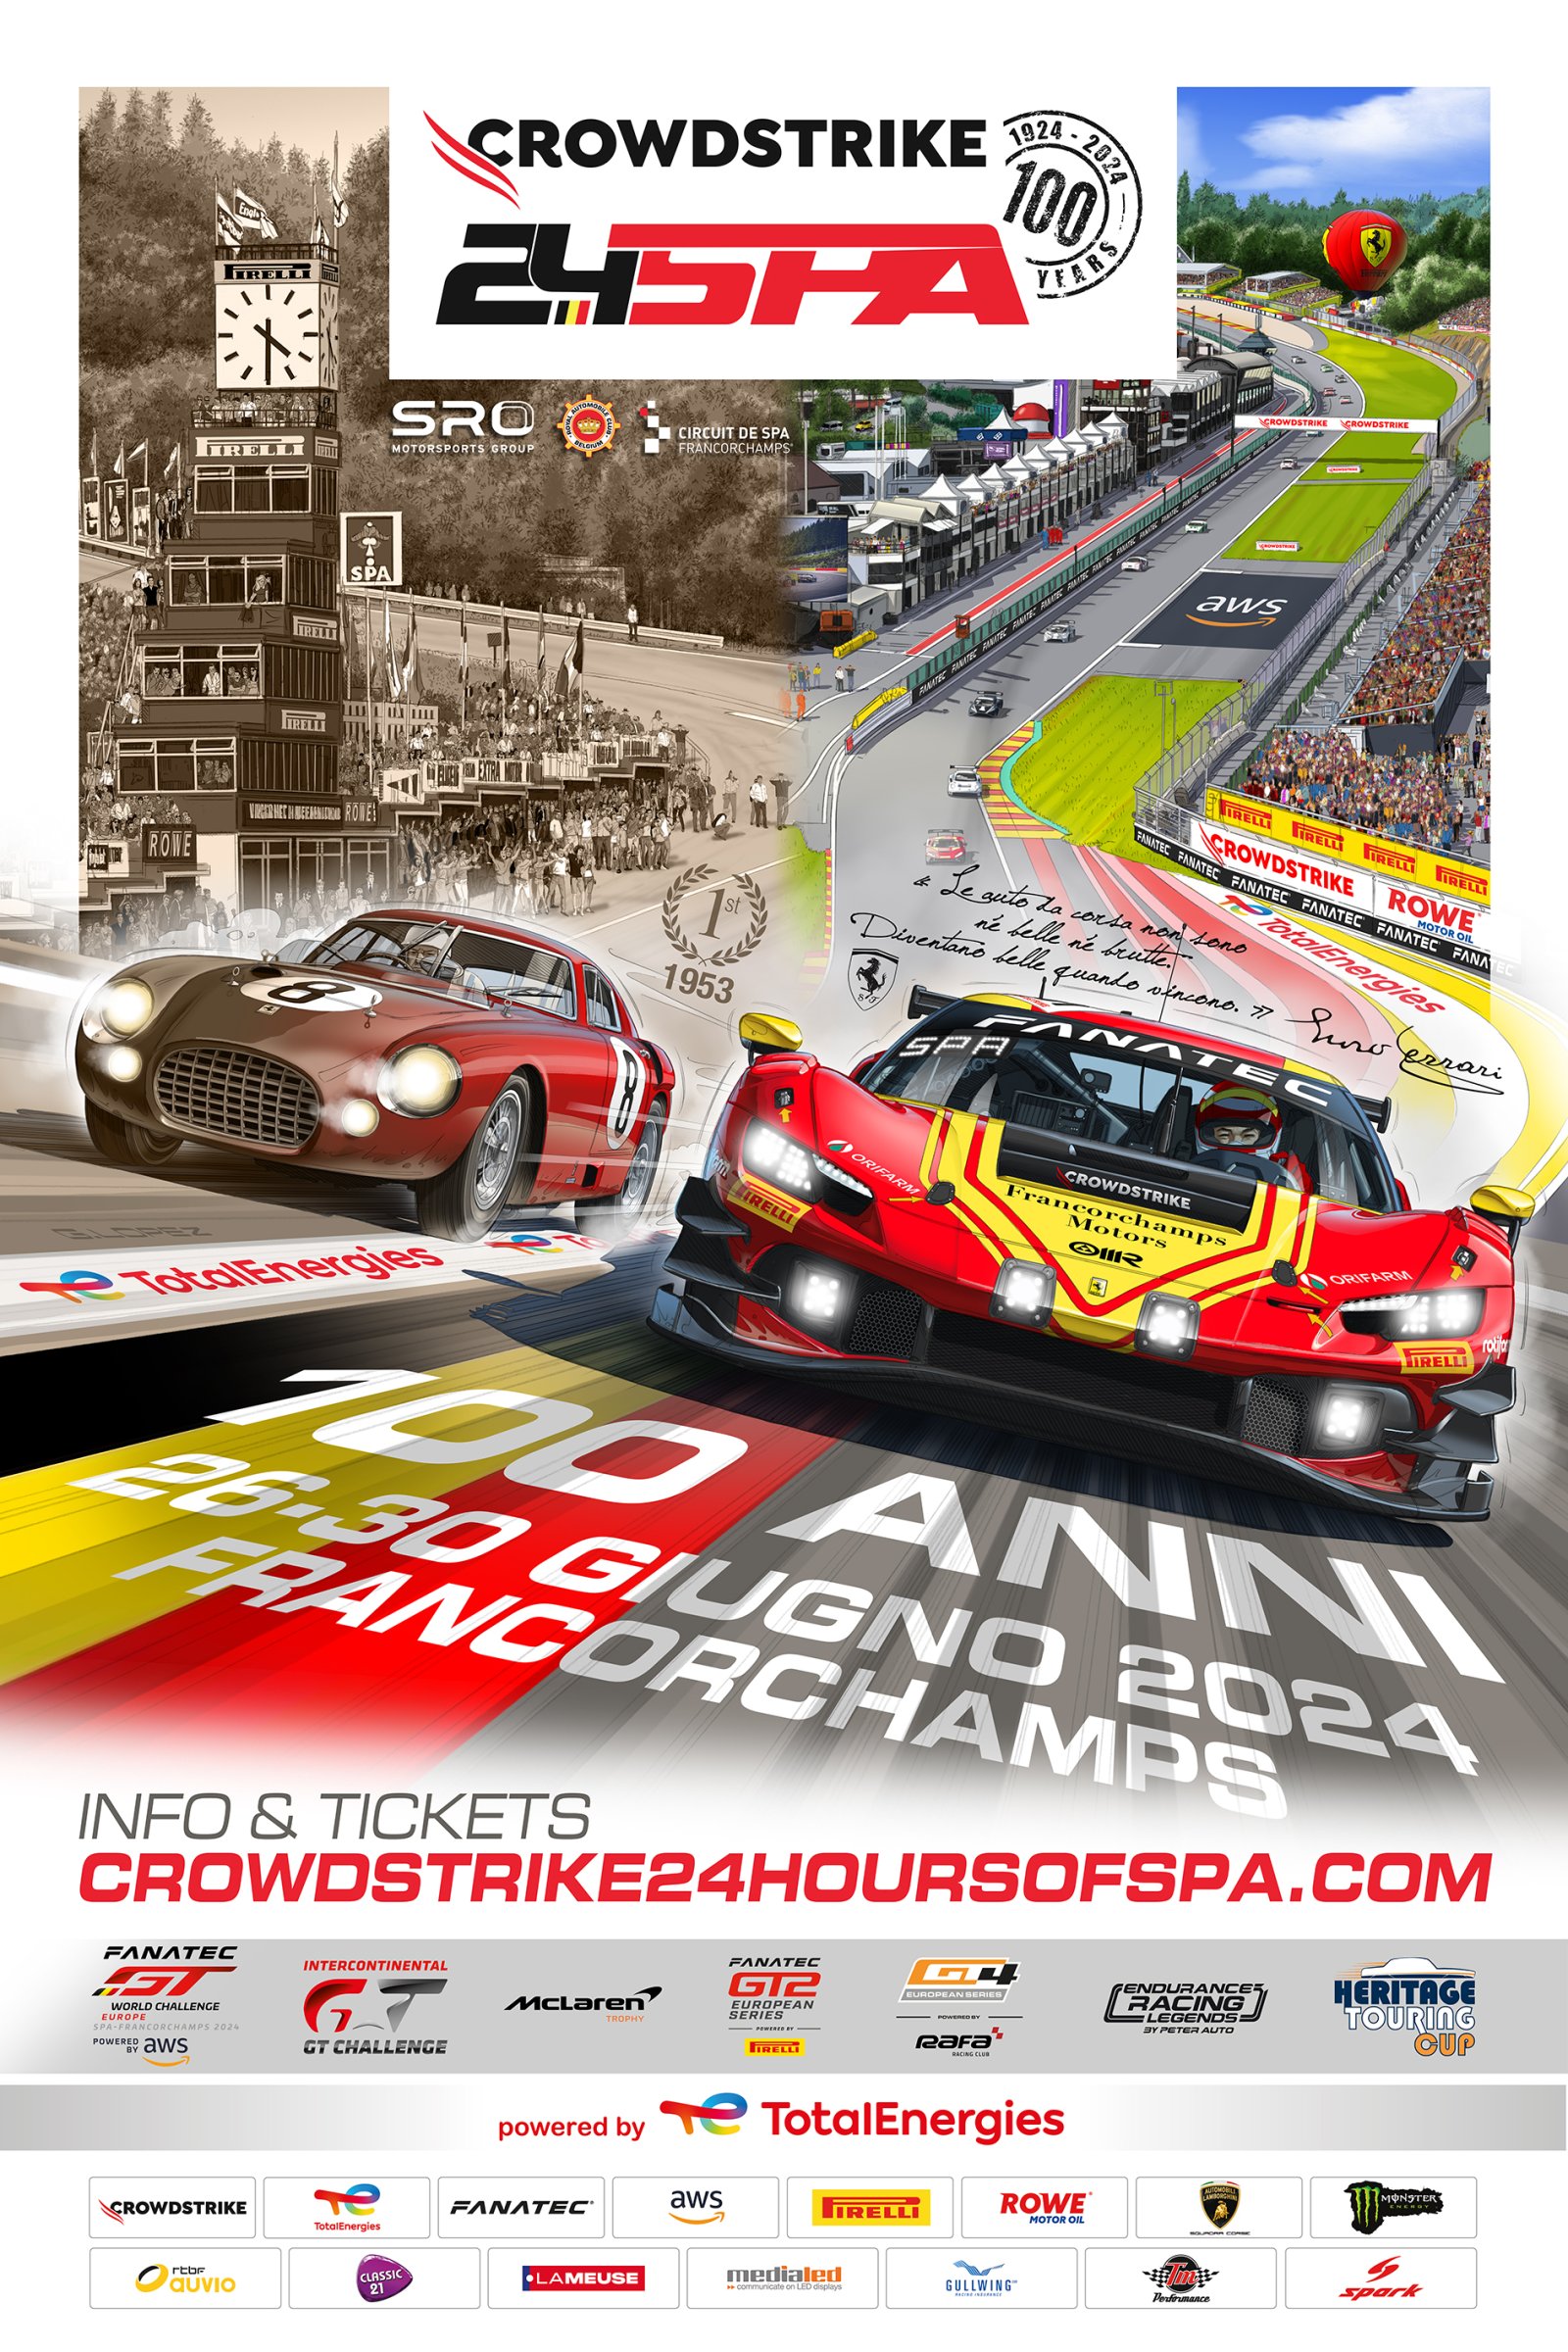 Poster 5/10: the legend of Ferrari at the CrowdStrike 24 Hours of Spa